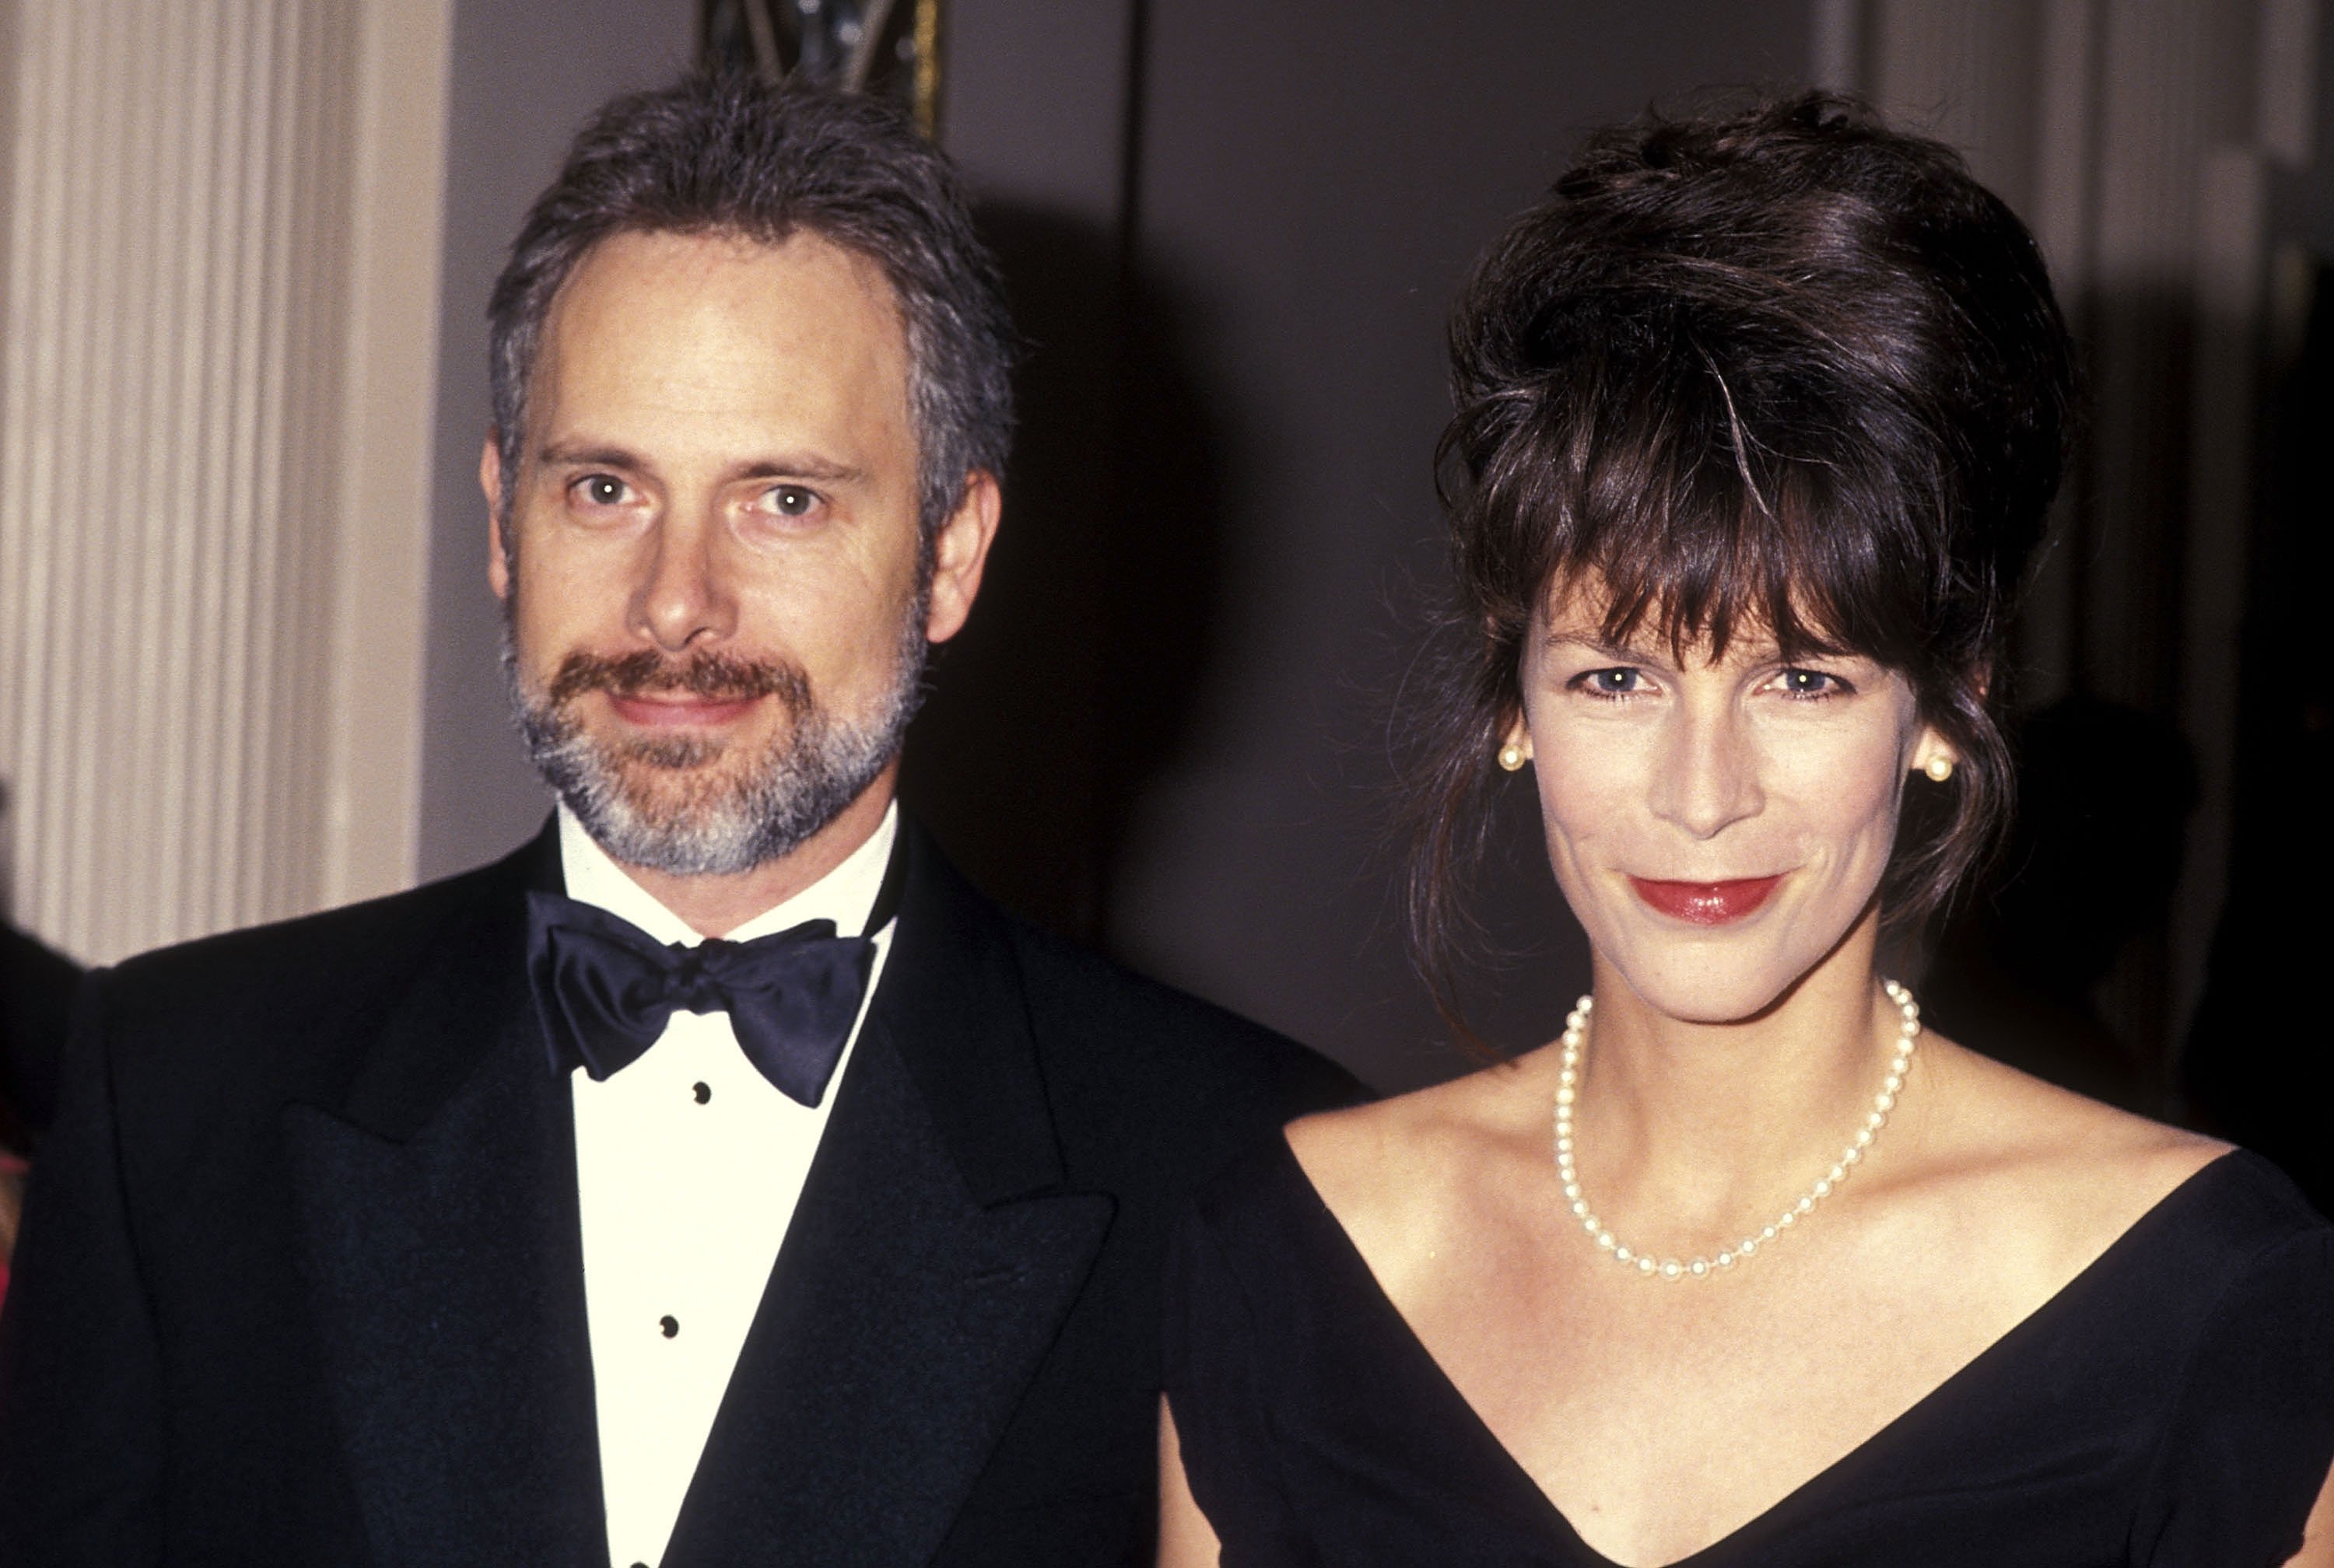 Christopher Guest and Jamie Lee Curtis wearing black and standing together.